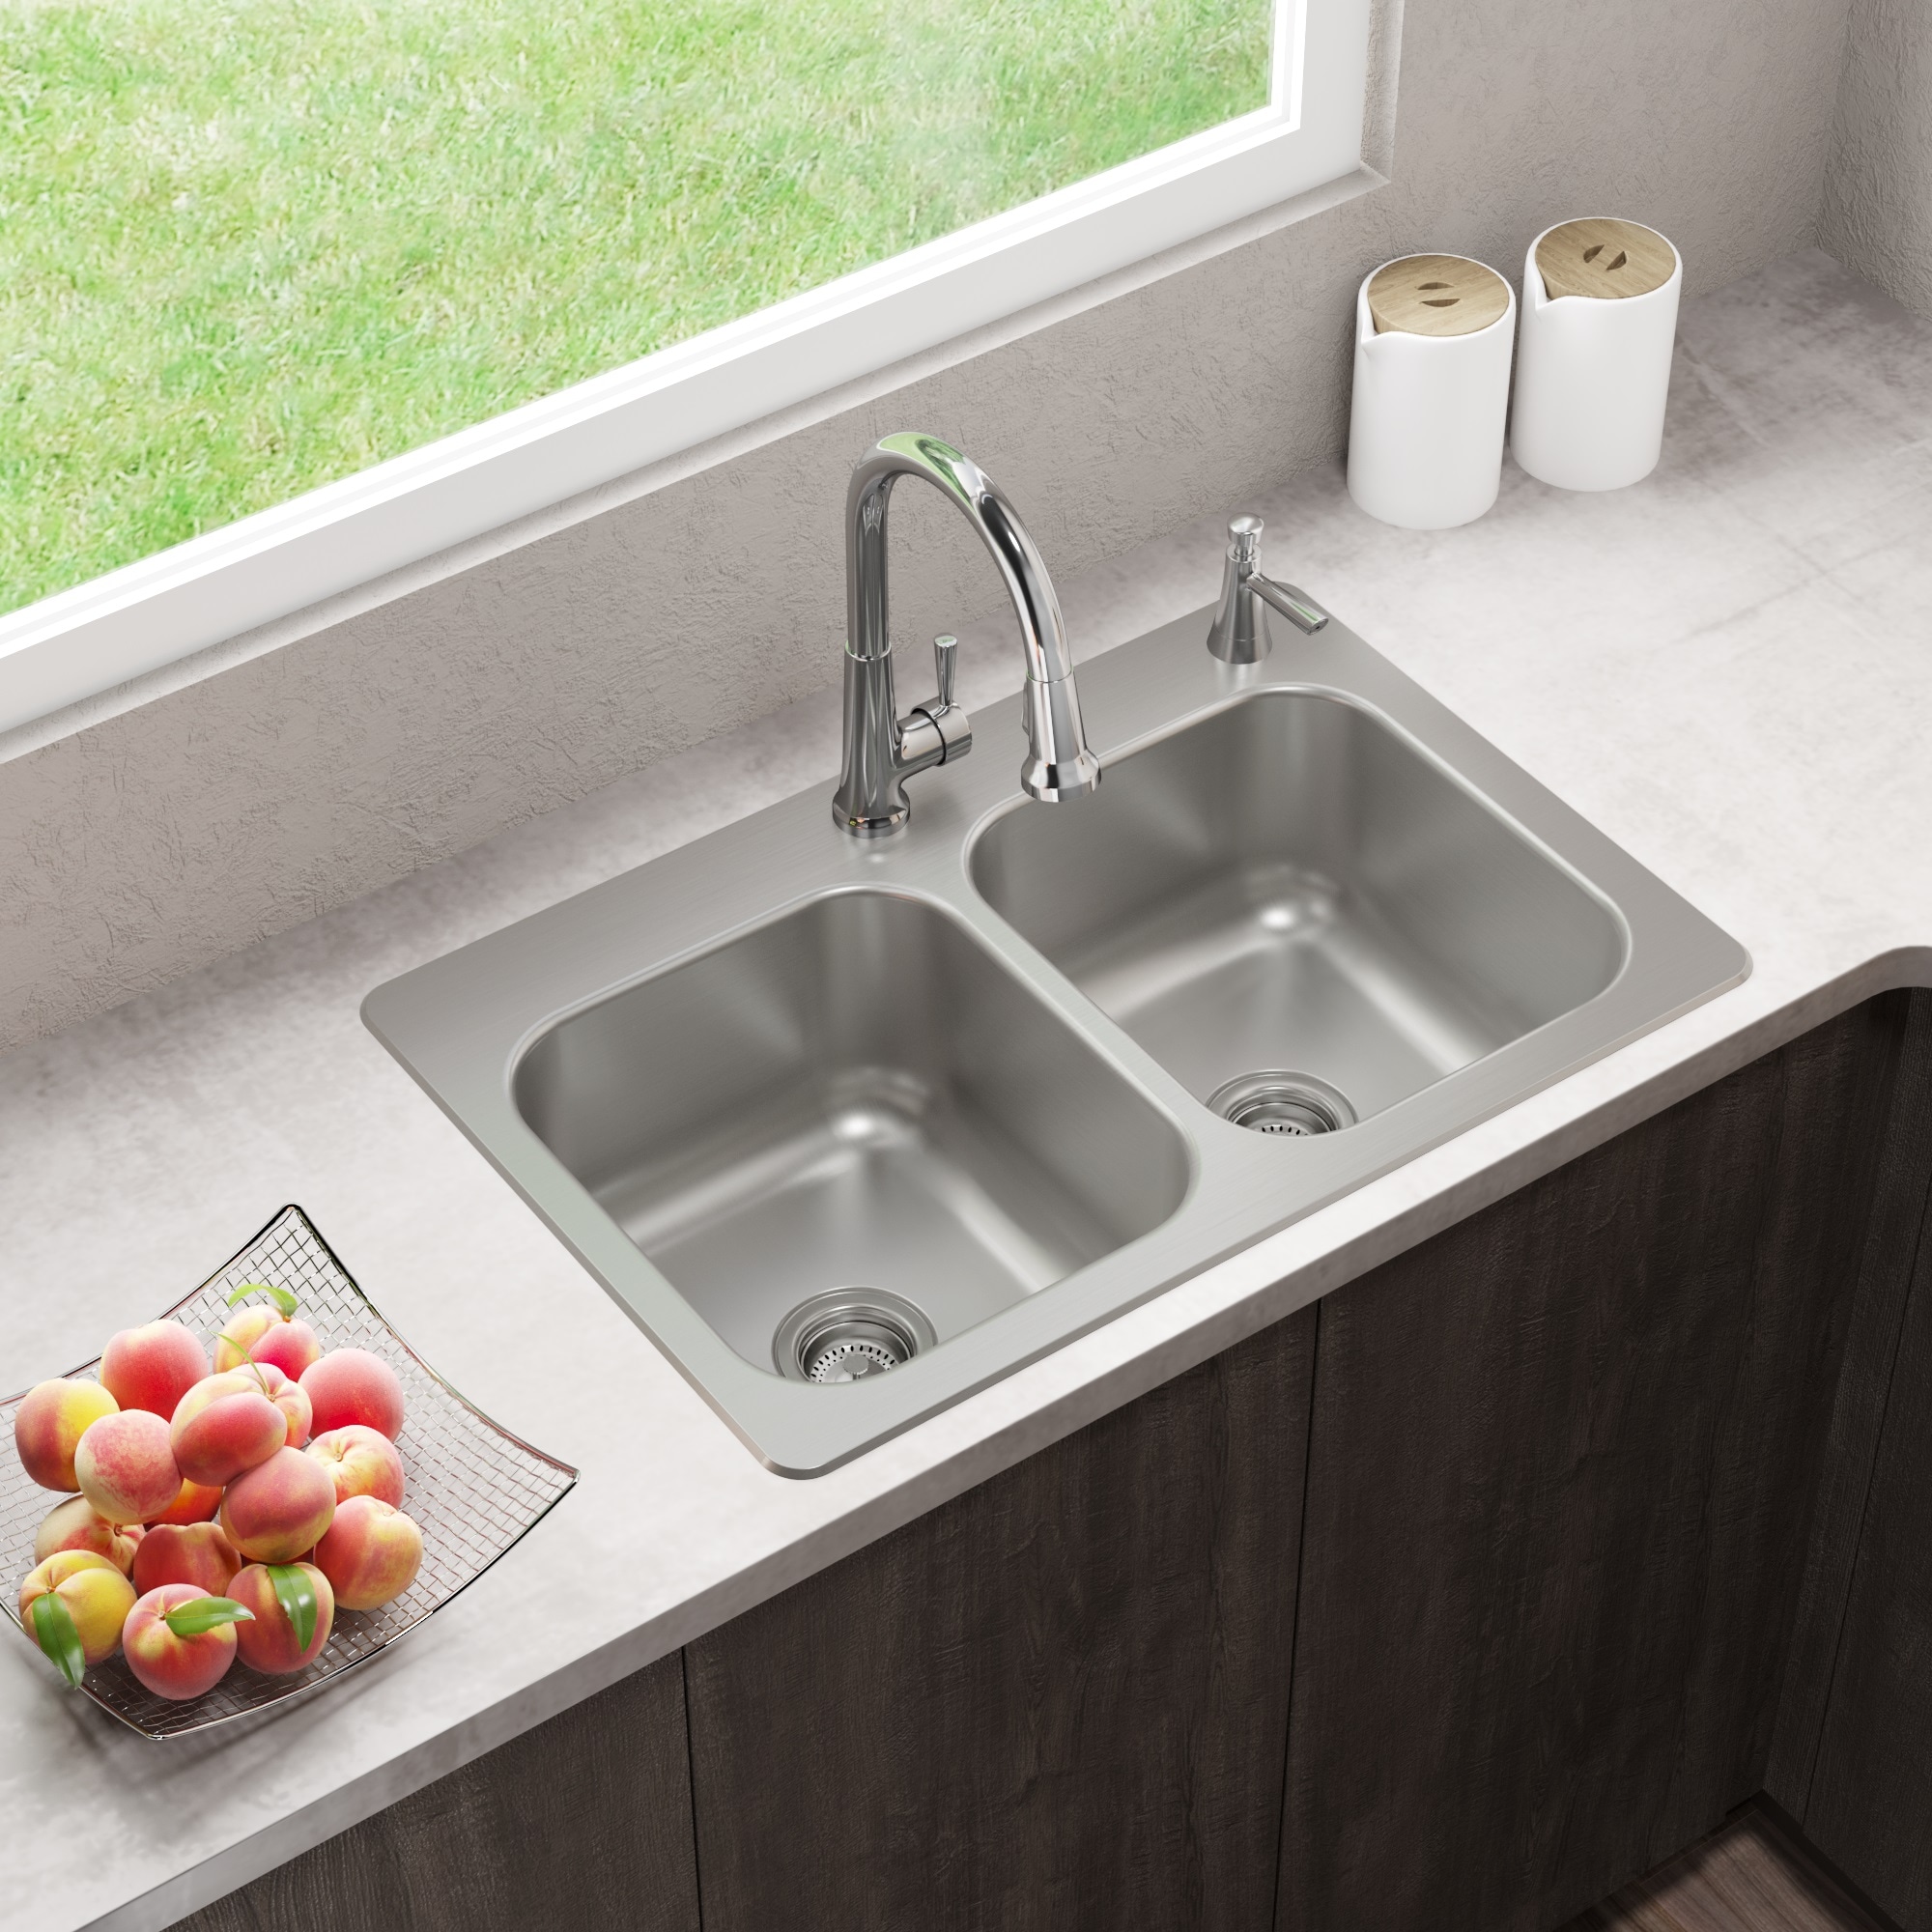 Lk Kitchen Sinks – Things In The Kitchen